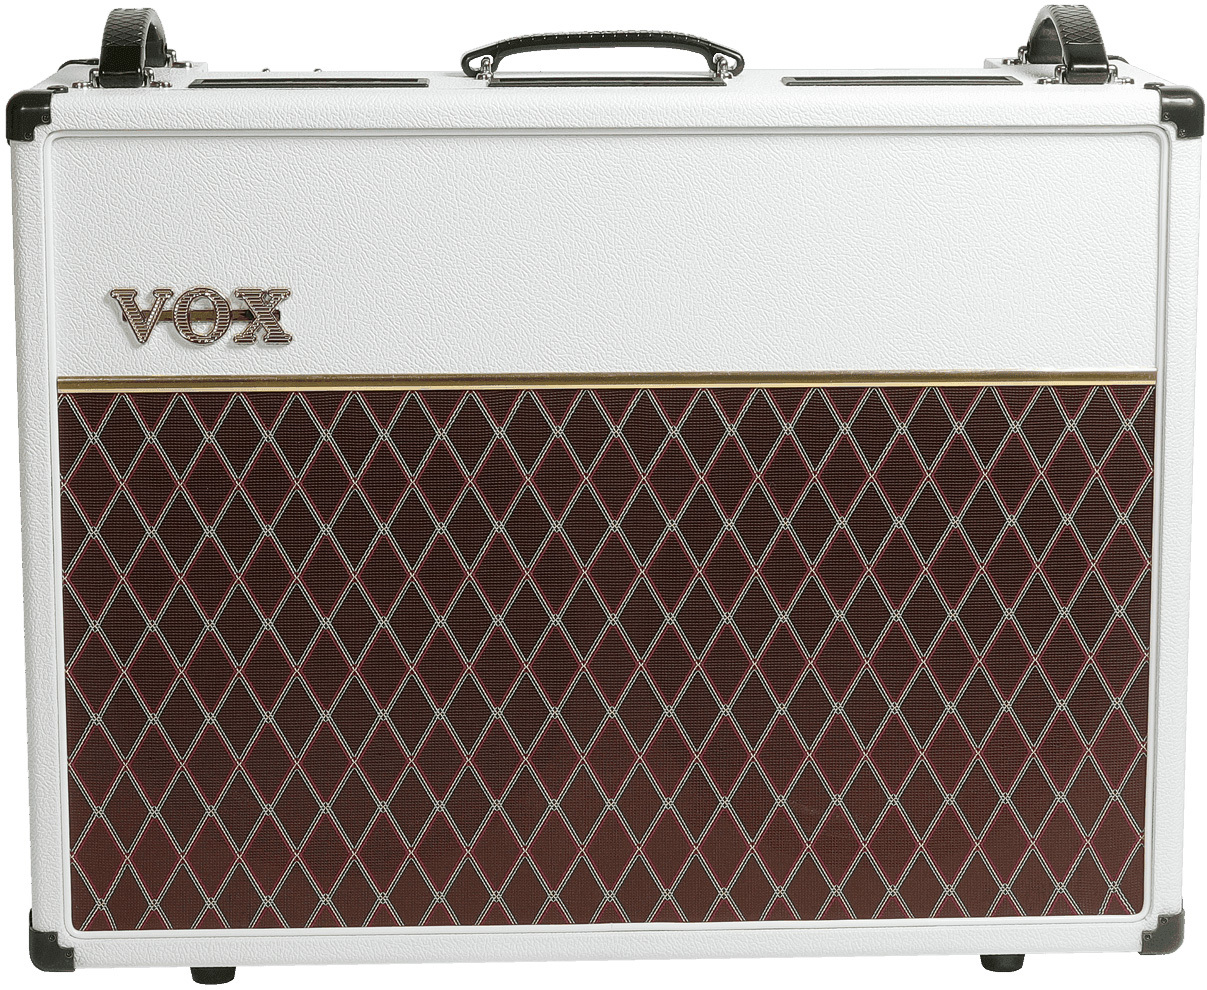 Vox Ac30c2 Limited Edition White Bronco 30w 2x12 - Electric guitar combo amp - Main picture